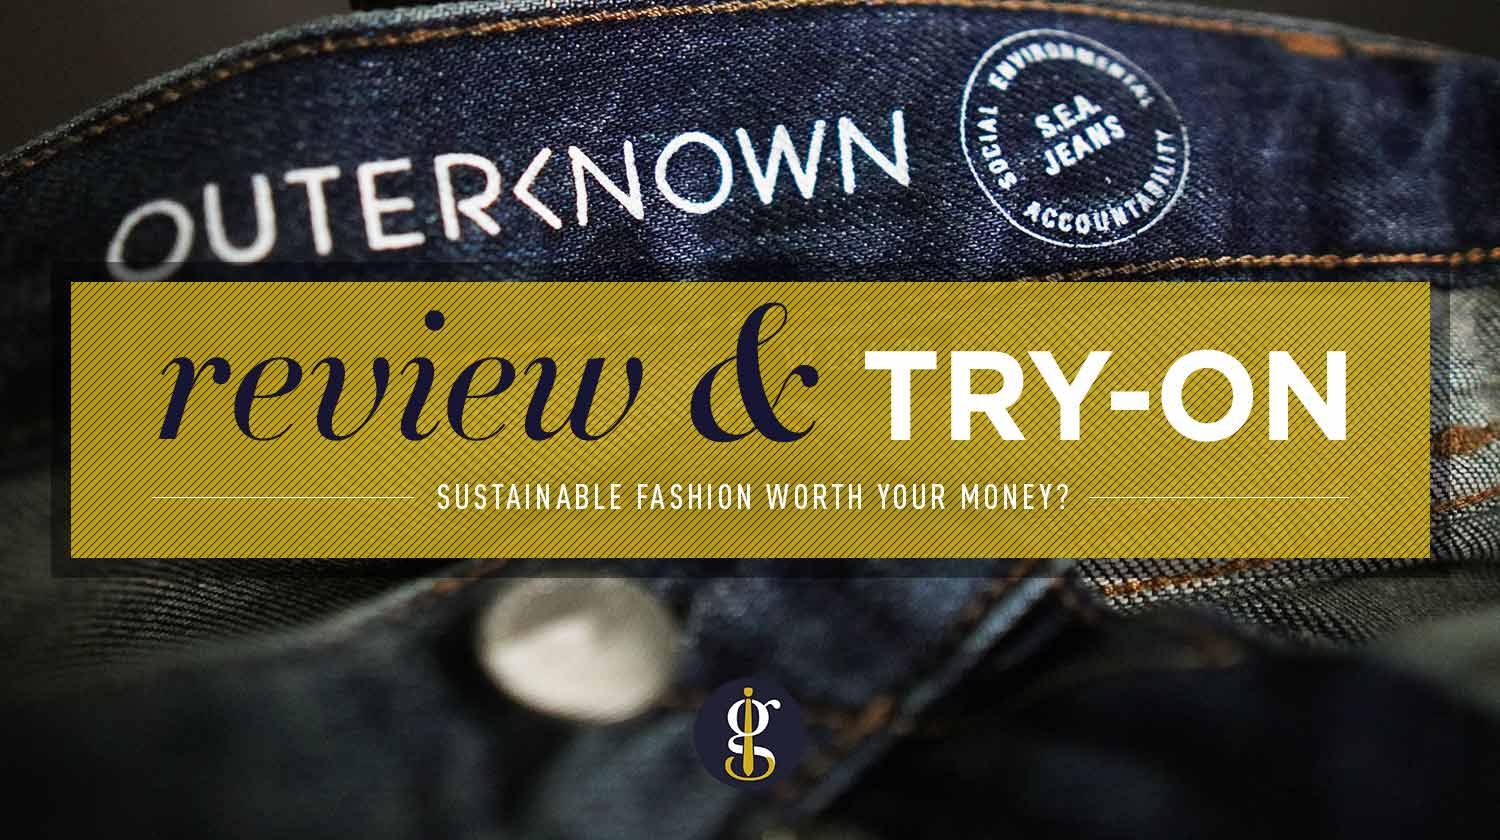 Outerknown Review for Men (Sustainable Fashion Worth Your Money?)